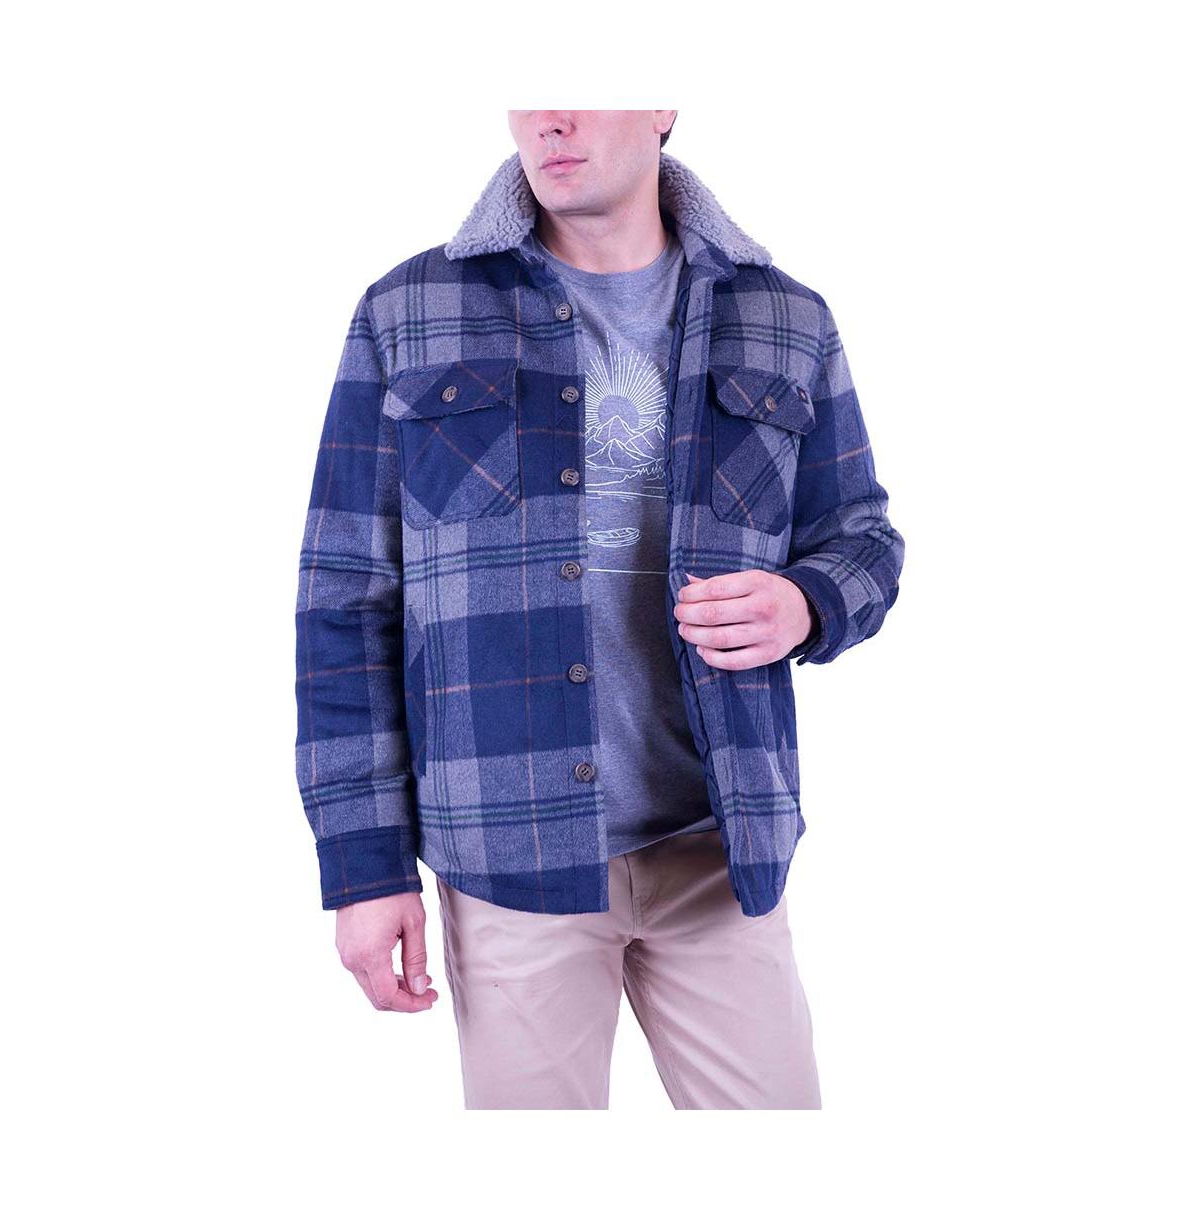 Men's Mountain and Isles Mountain Man Insulated Coat - Navy/charcoal plaid